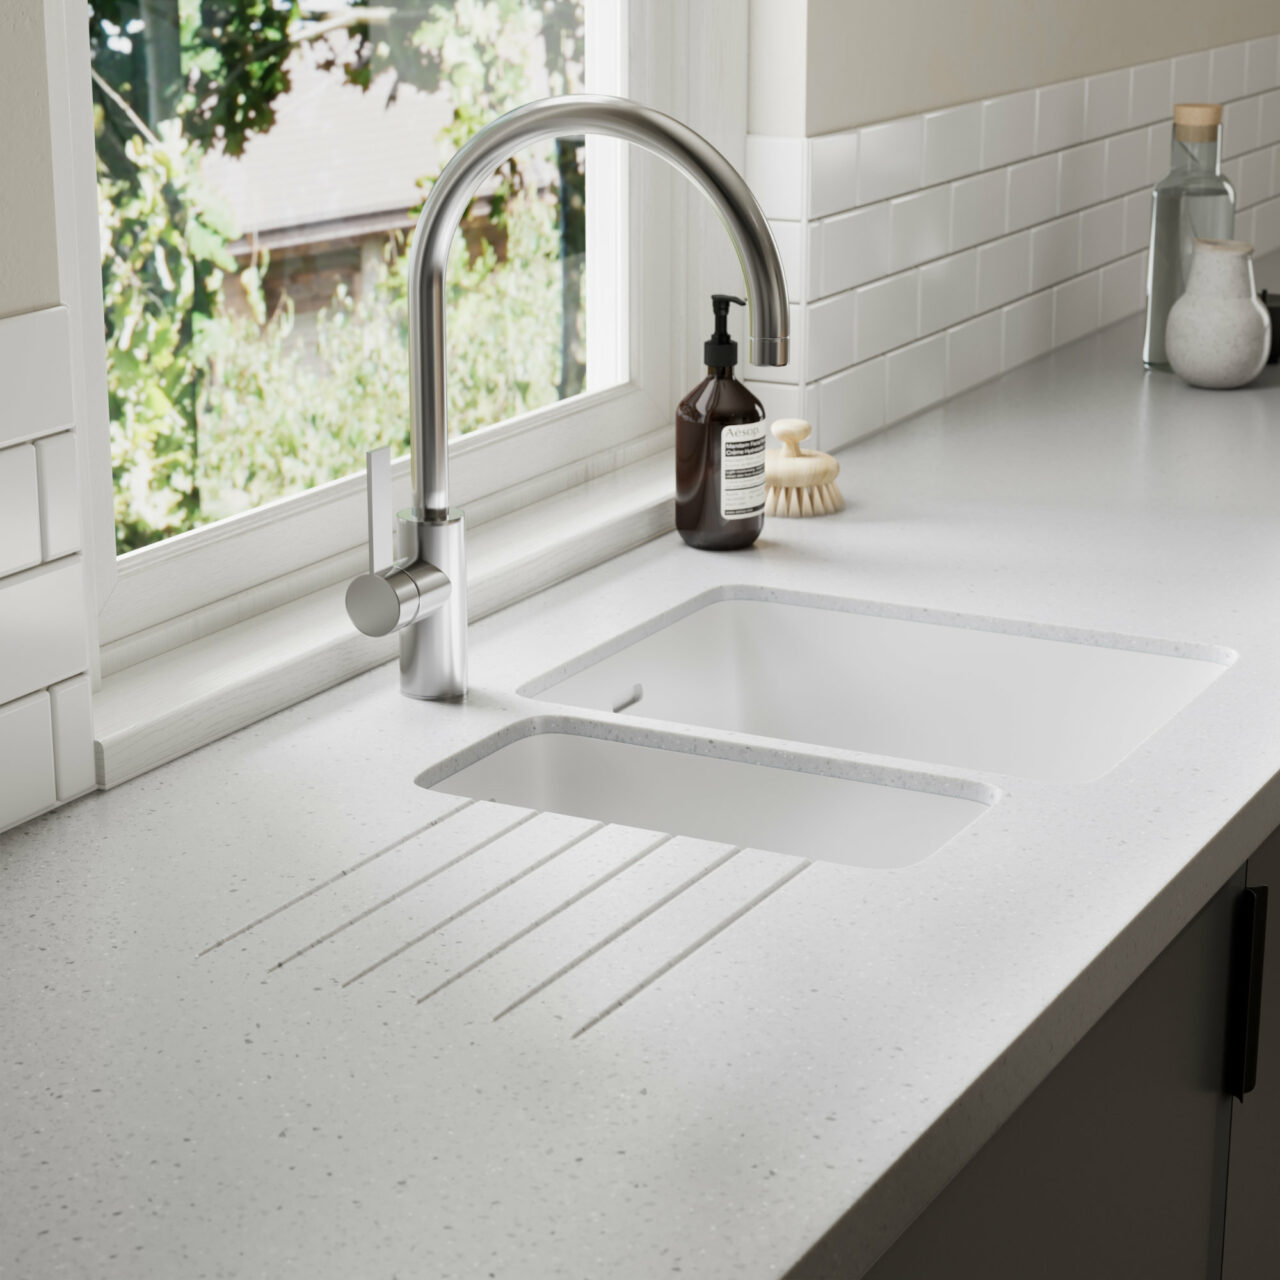 White Durasein kitchen worktop with an integrated sink and drainer grooves